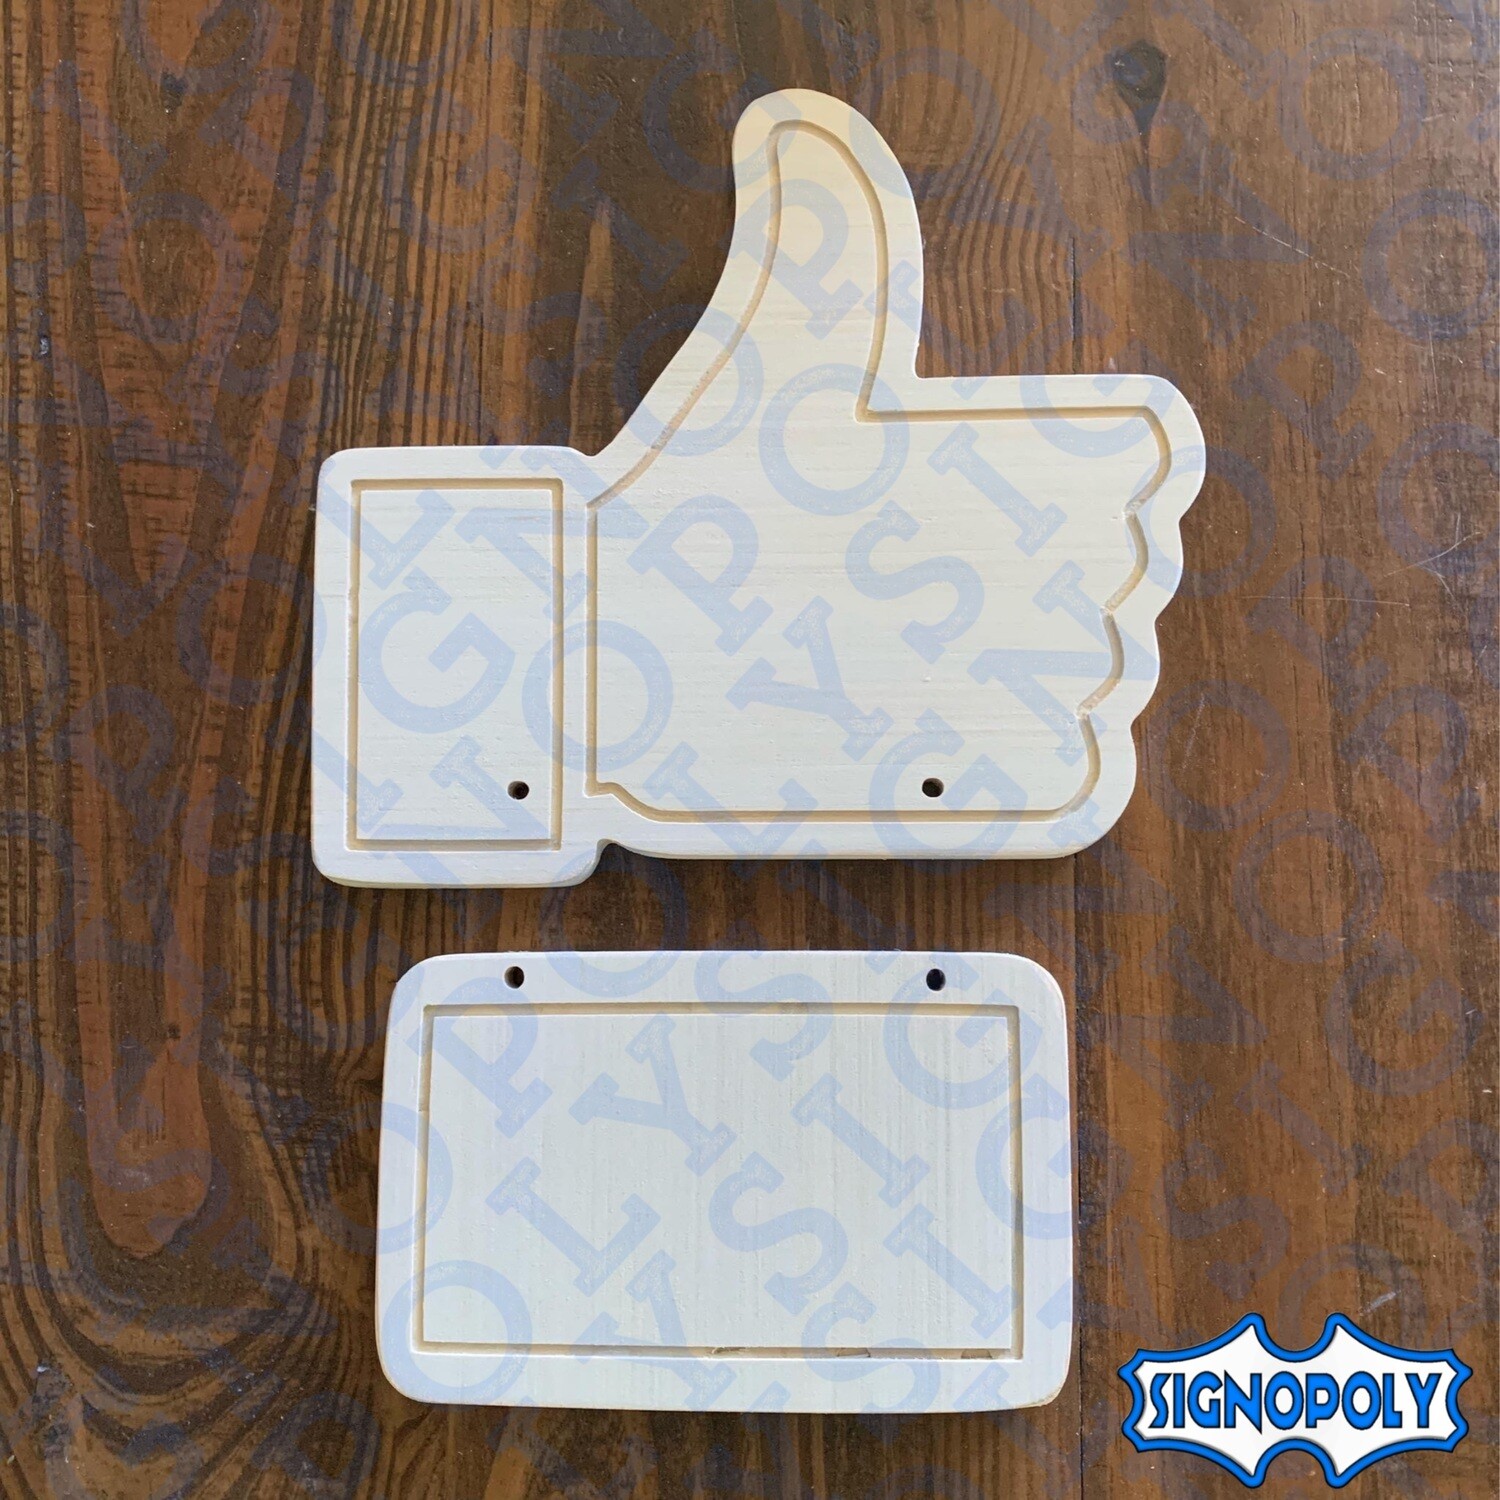 Like Us Hand and Plaque Facebook Thumb set